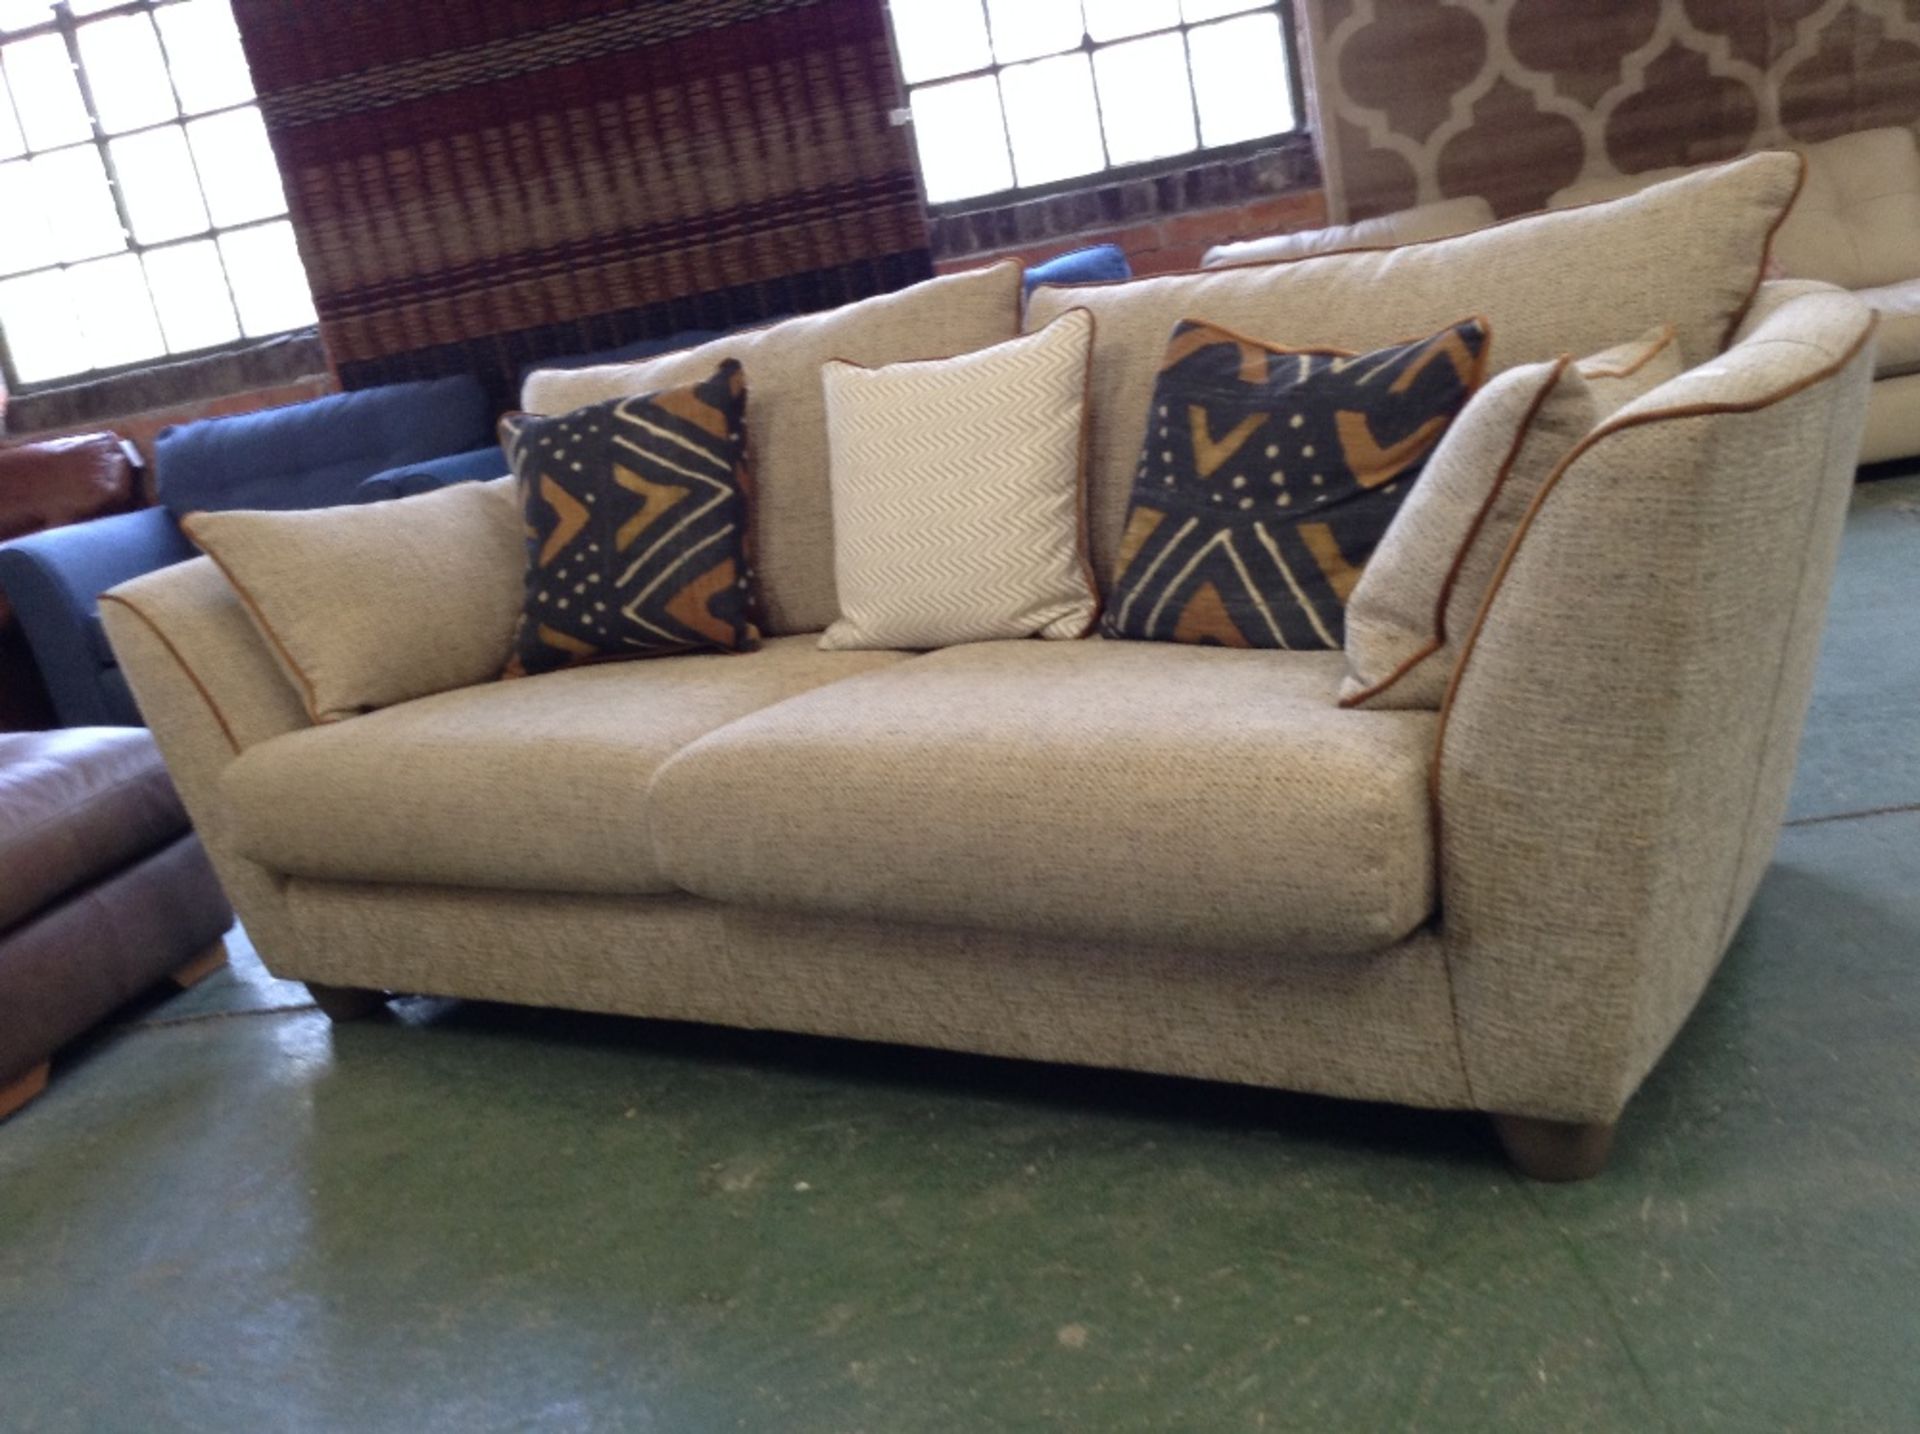 EX SHOWROOM BISCUIT PATTERNED 3 SEATER SOFA (WM49-